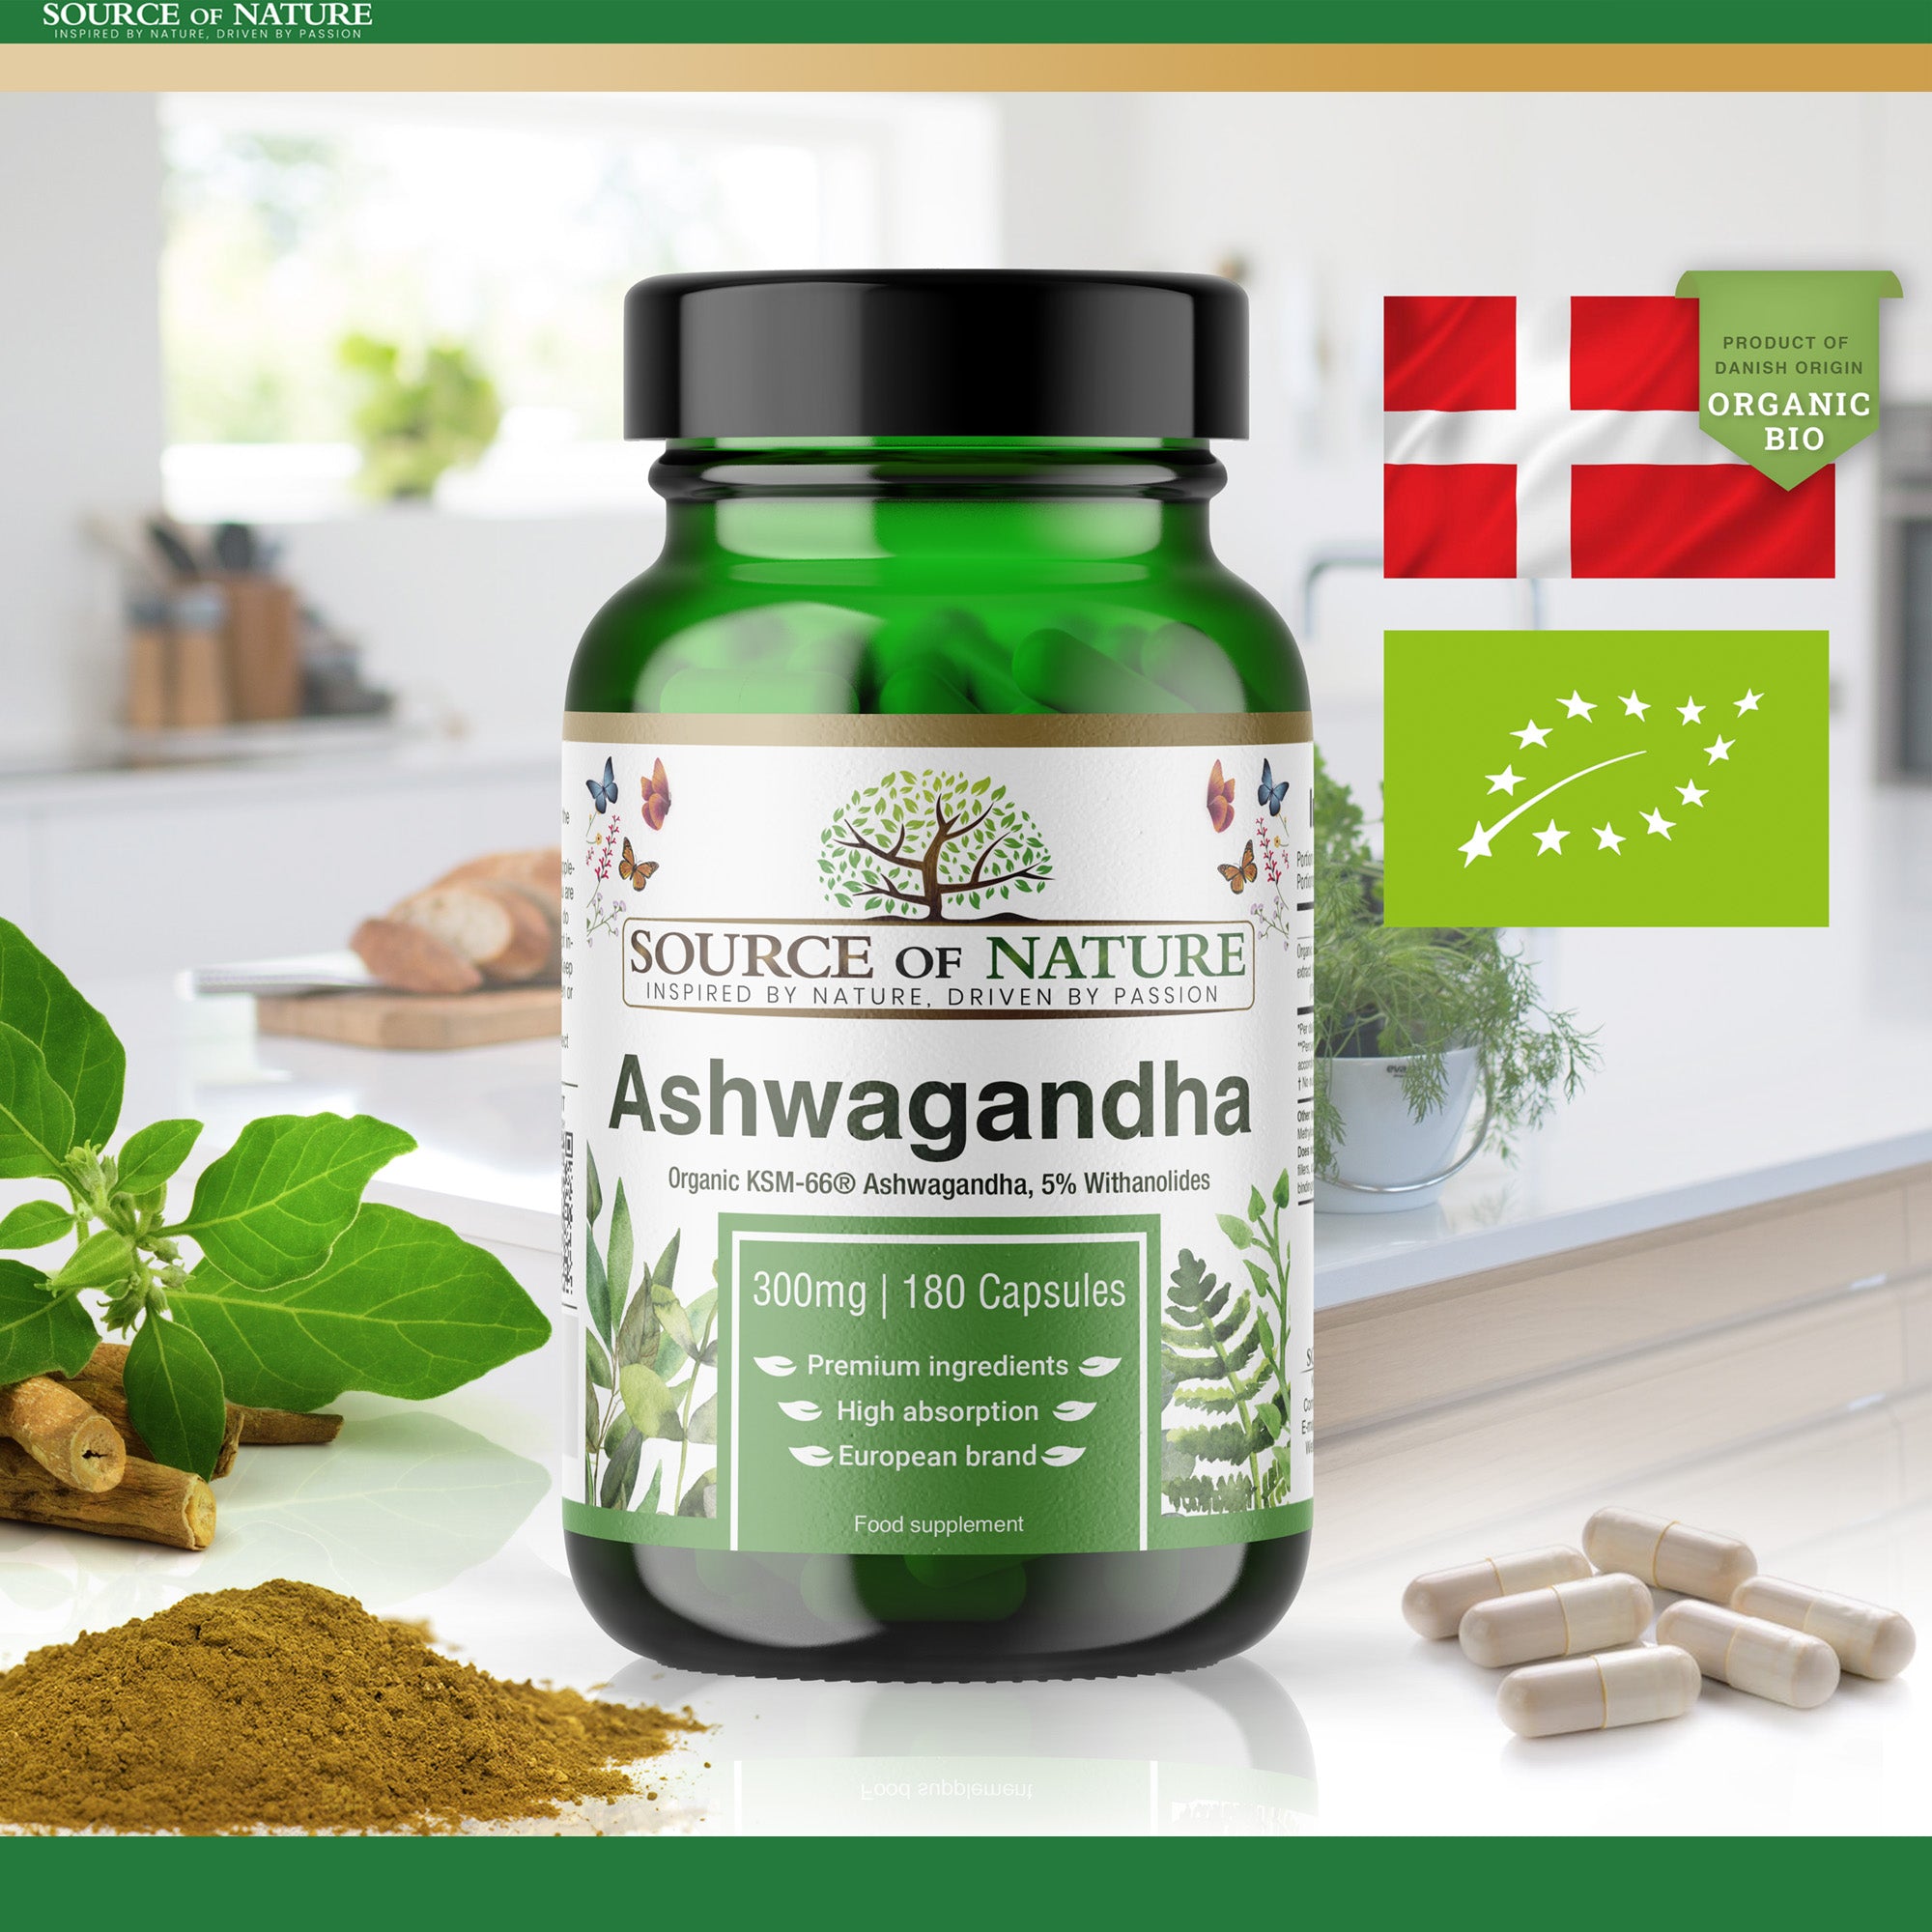 Elevate Your Wellness with Source of Nature's Organic KSM-66 Ashwagandha